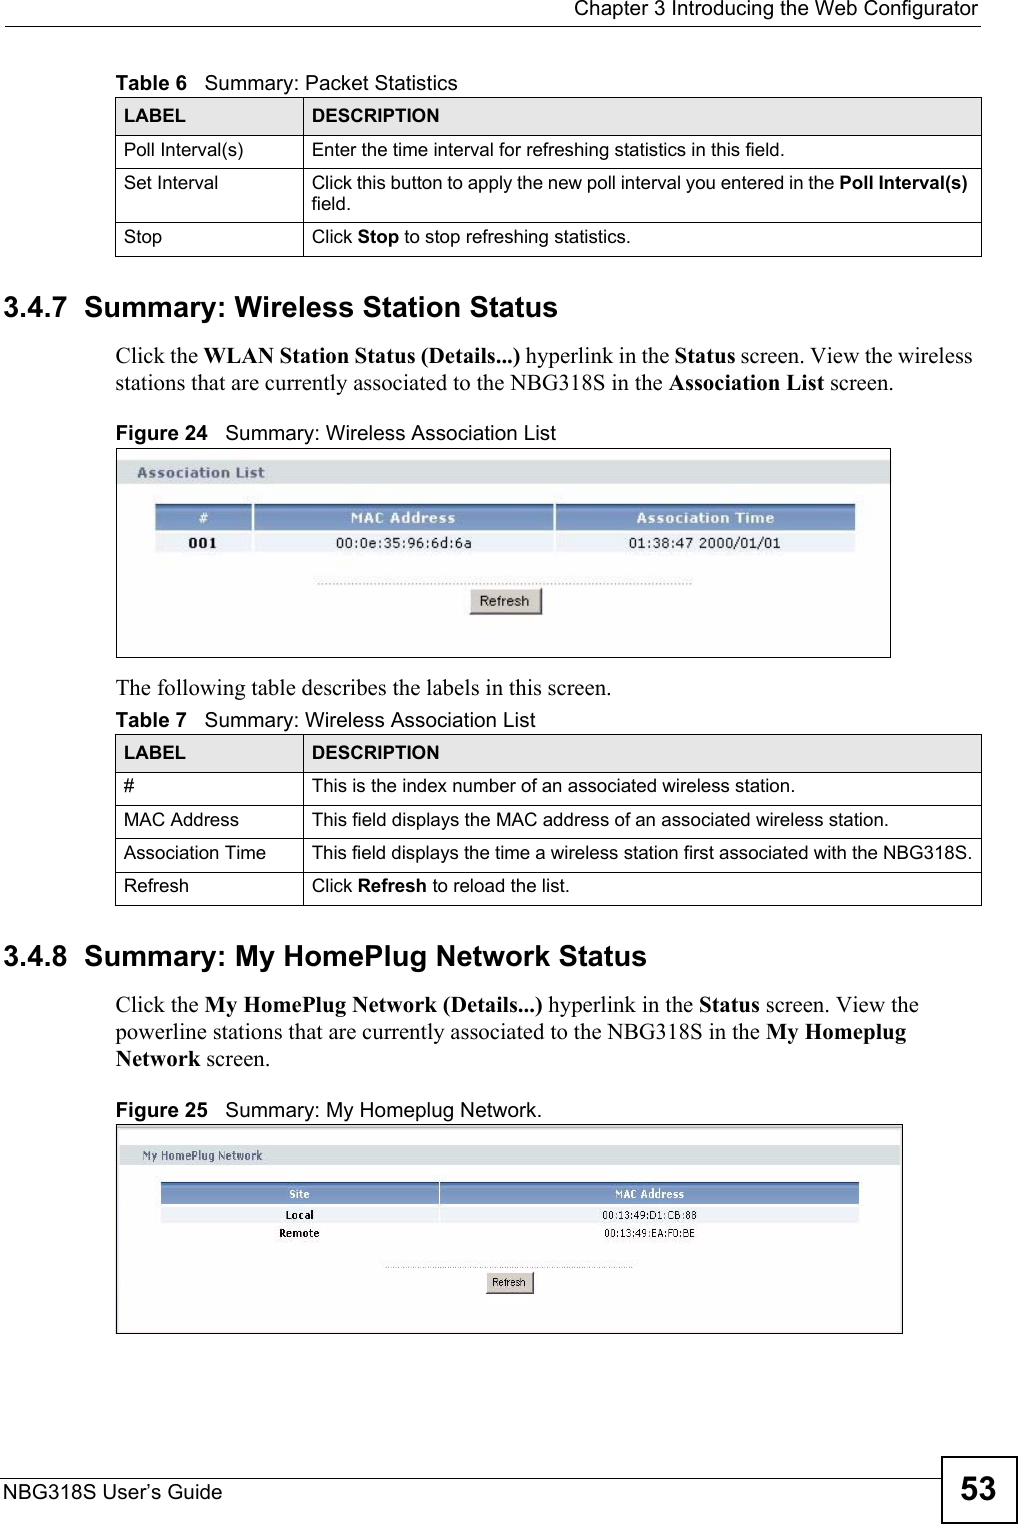  Chapter 3 Introducing the Web ConfiguratorNBG318S User’s Guide 533.4.7  Summary: Wireless Station Status     Click the WLAN Station Status (Details...) hyperlink in the Status screen. View the wireless stations that are currently associated to the NBG318S in the Association List screen.Figure 24   Summary: Wireless Association ListThe following table describes the labels in this screen.3.4.8  Summary: My HomePlug Network StatusClick the My HomePlug Network (Details...) hyperlink in the Status screen. View the powerline stations that are currently associated to the NBG318S in the My Homeplug Network screen.Figure 25   Summary: My Homeplug Network.Poll Interval(s) Enter the time interval for refreshing statistics in this field.Set Interval Click this button to apply the new poll interval you entered in the Poll Interval(s) field.Stop Click Stop to stop refreshing statistics.Table 6   Summary: Packet StatisticsLABEL DESCRIPTIONTable 7   Summary: Wireless Association ListLABEL DESCRIPTION#  This is the index number of an associated wireless station. MAC Address  This field displays the MAC address of an associated wireless station.Association Time This field displays the time a wireless station first associated with the NBG318S.Refresh Click Refresh to reload the list. 